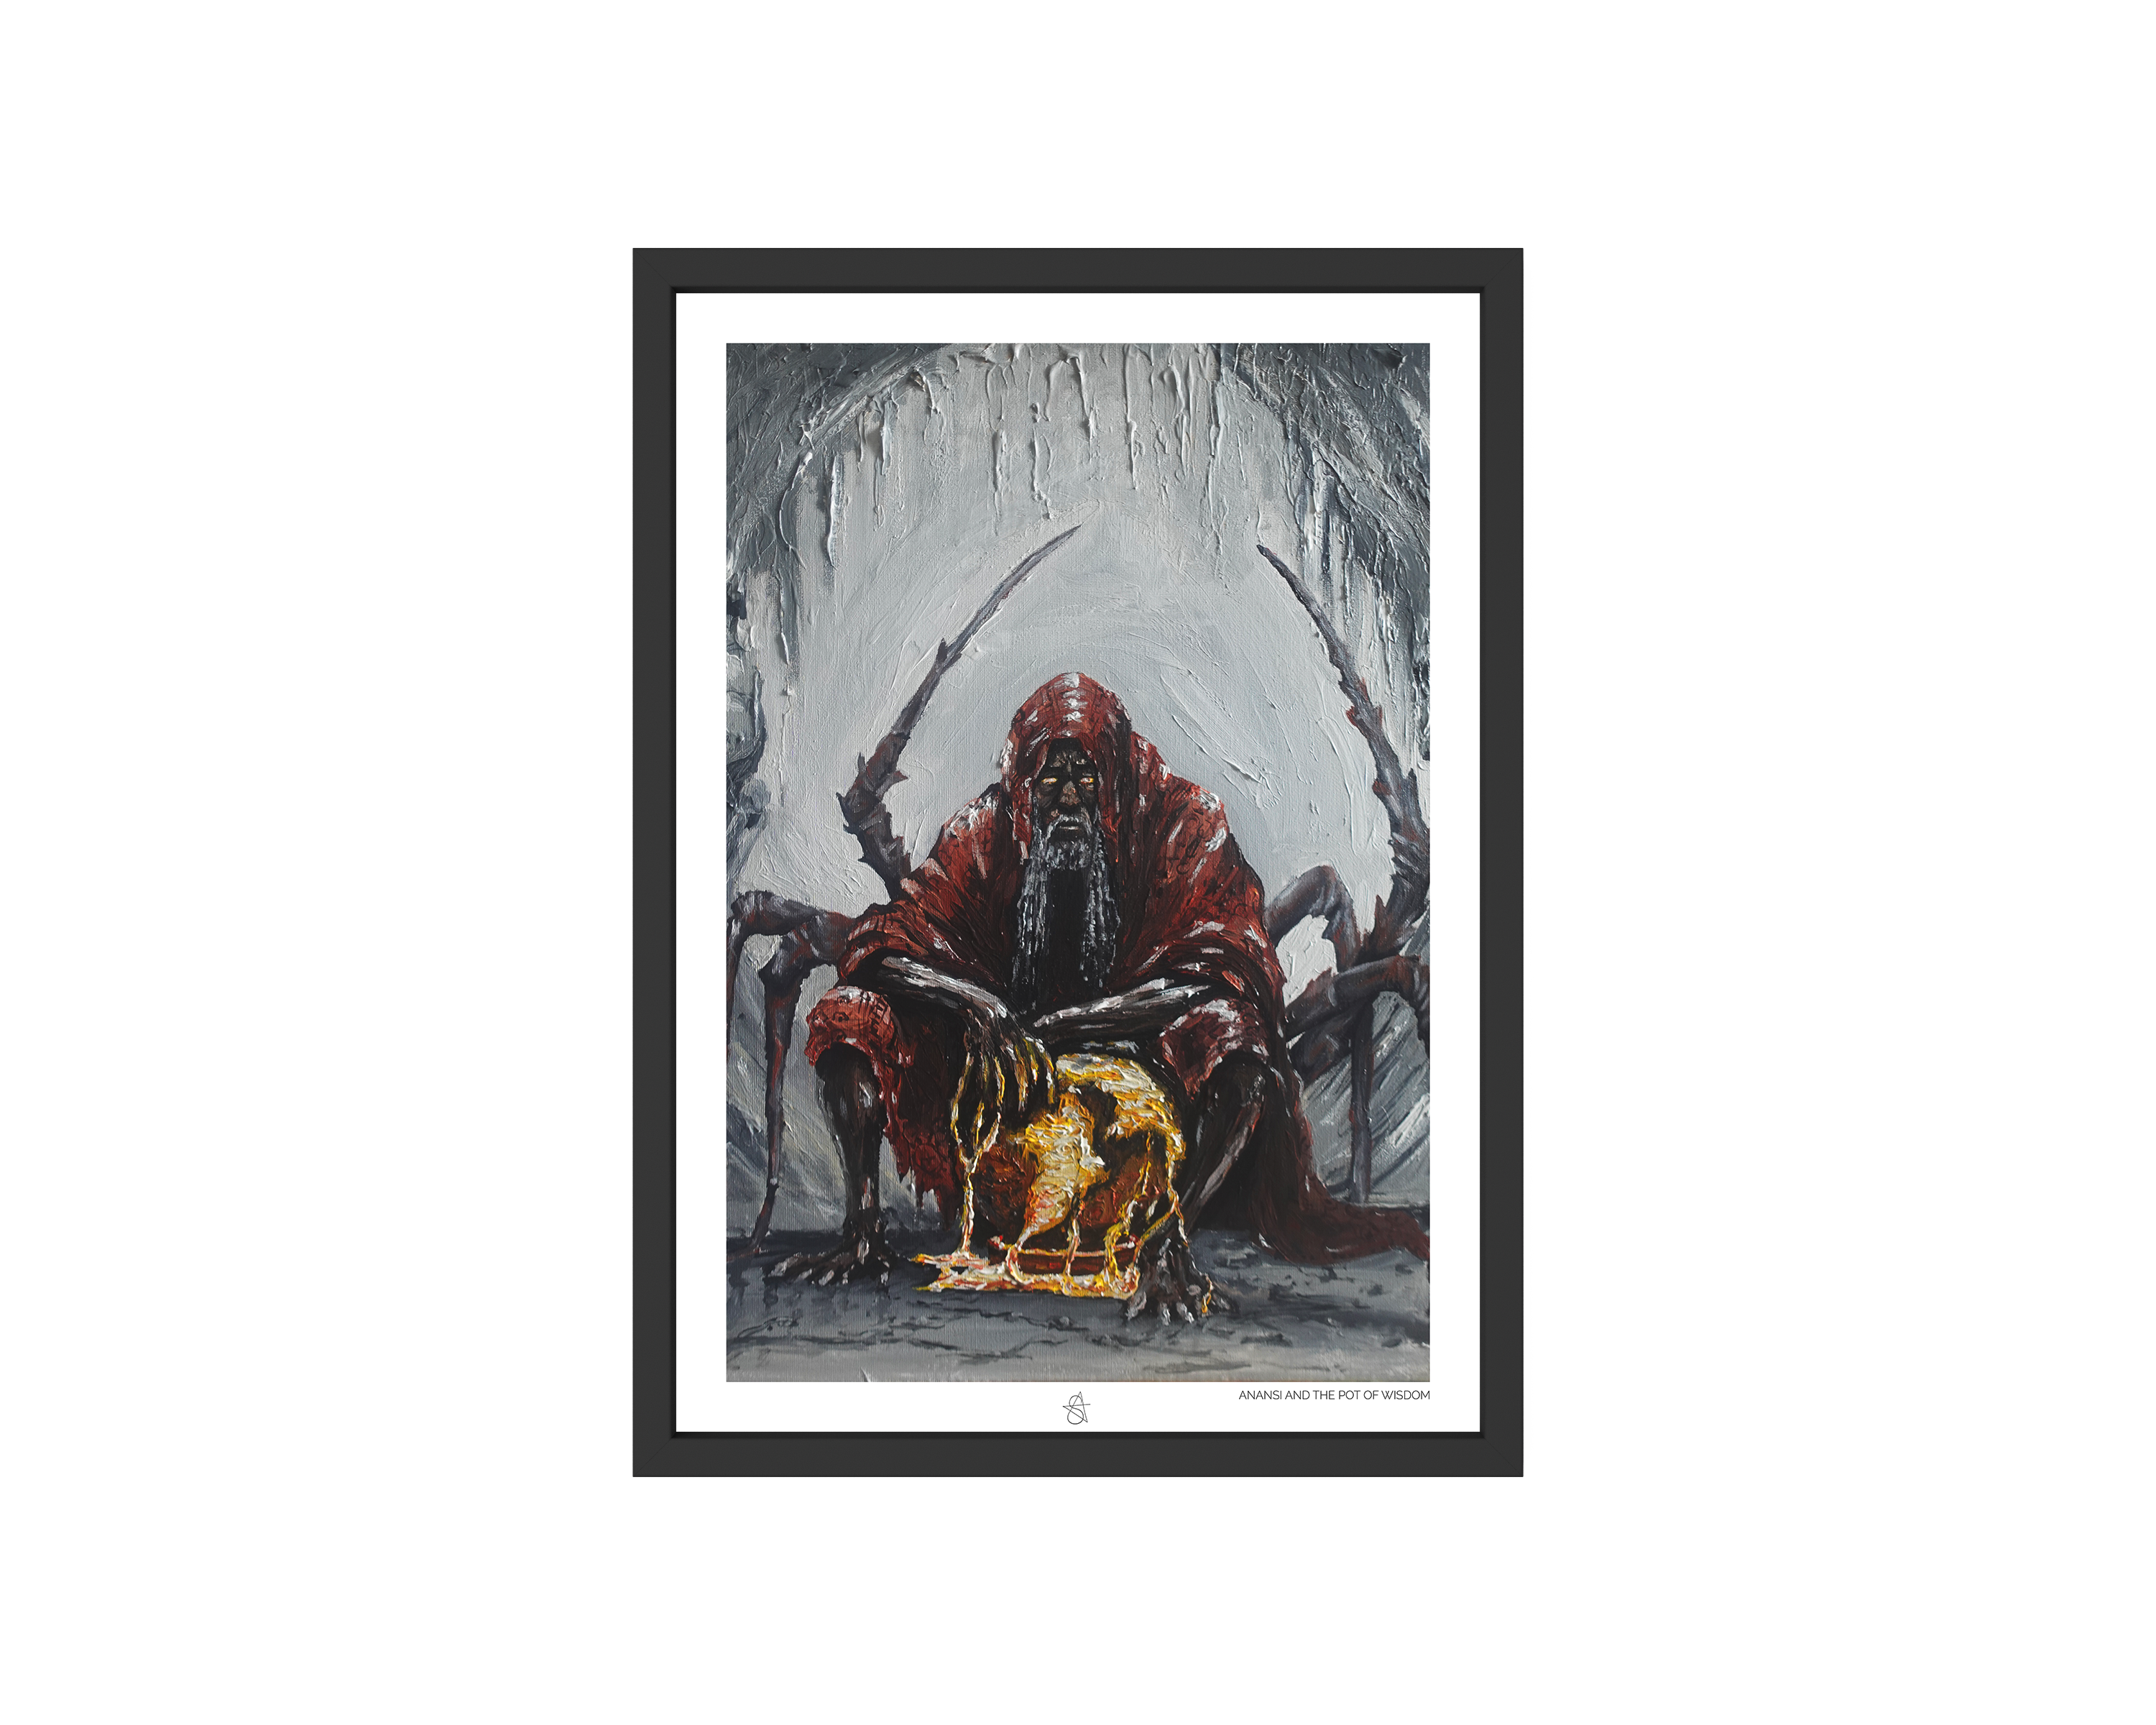 Anansi Art Print on high-quality matte or velvet paper, framed in gallery black, white, or natural maple, depicting the Akan folktale of Anansi the spider about how wisdom came to the world.